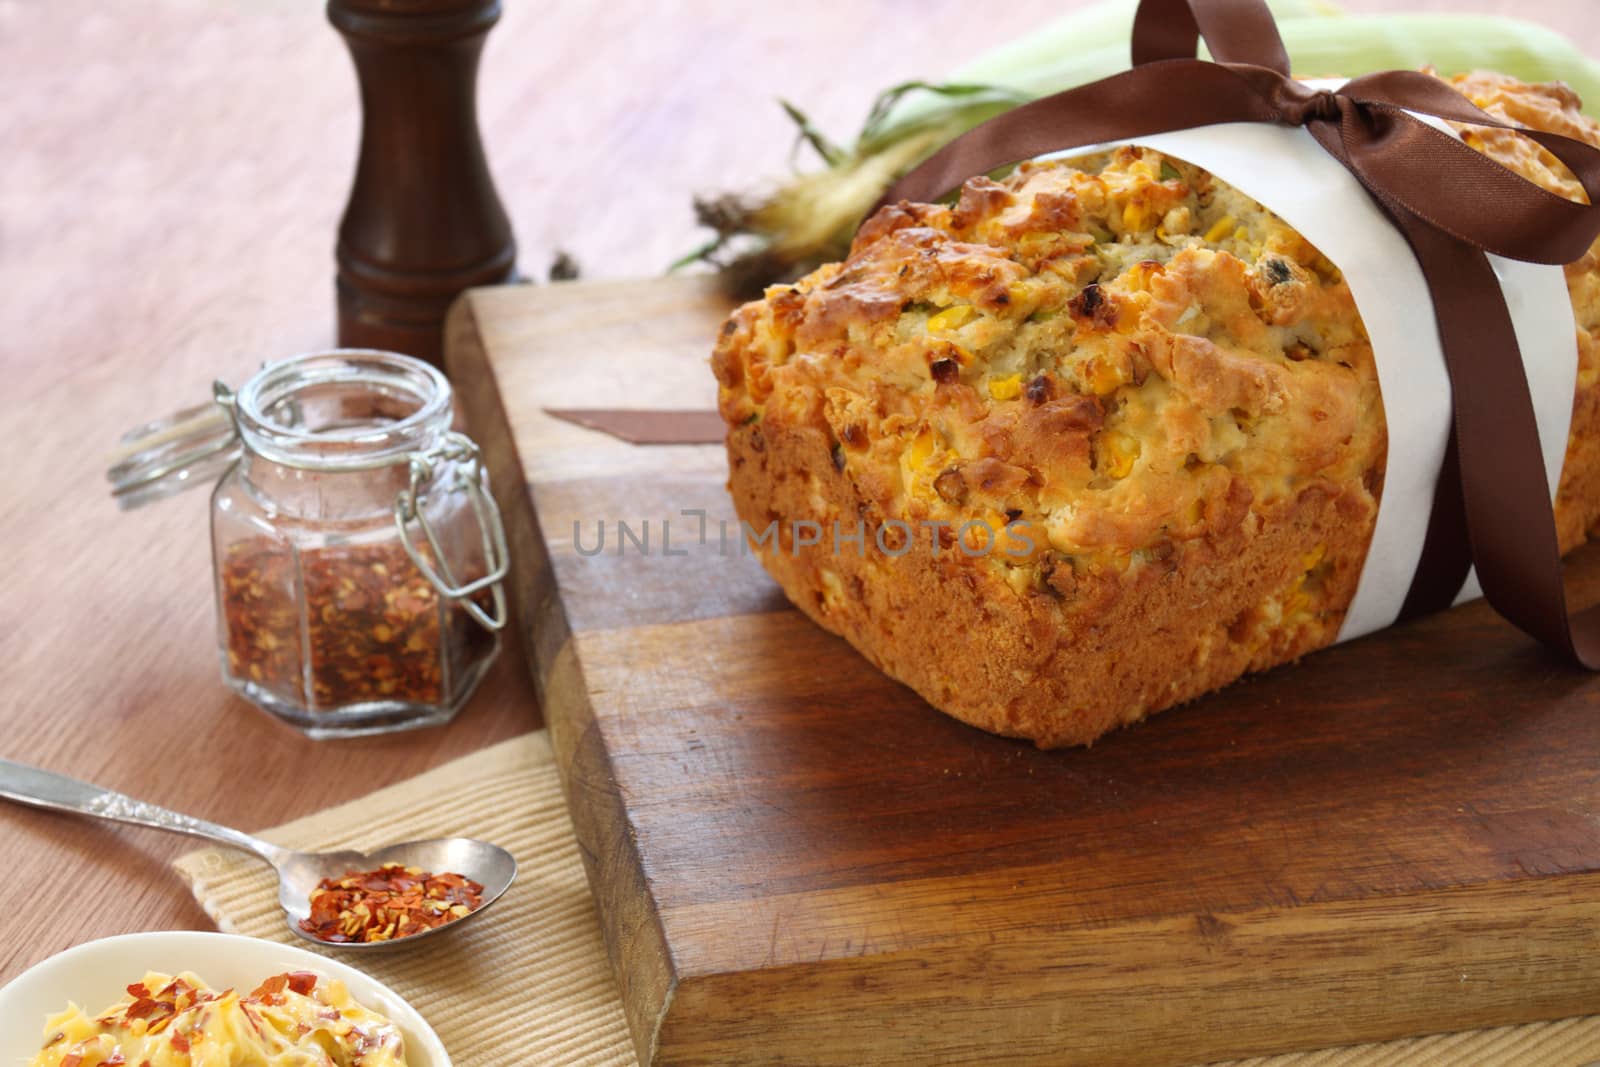 Fresh baked corn bread with corn cobs ready to serve.